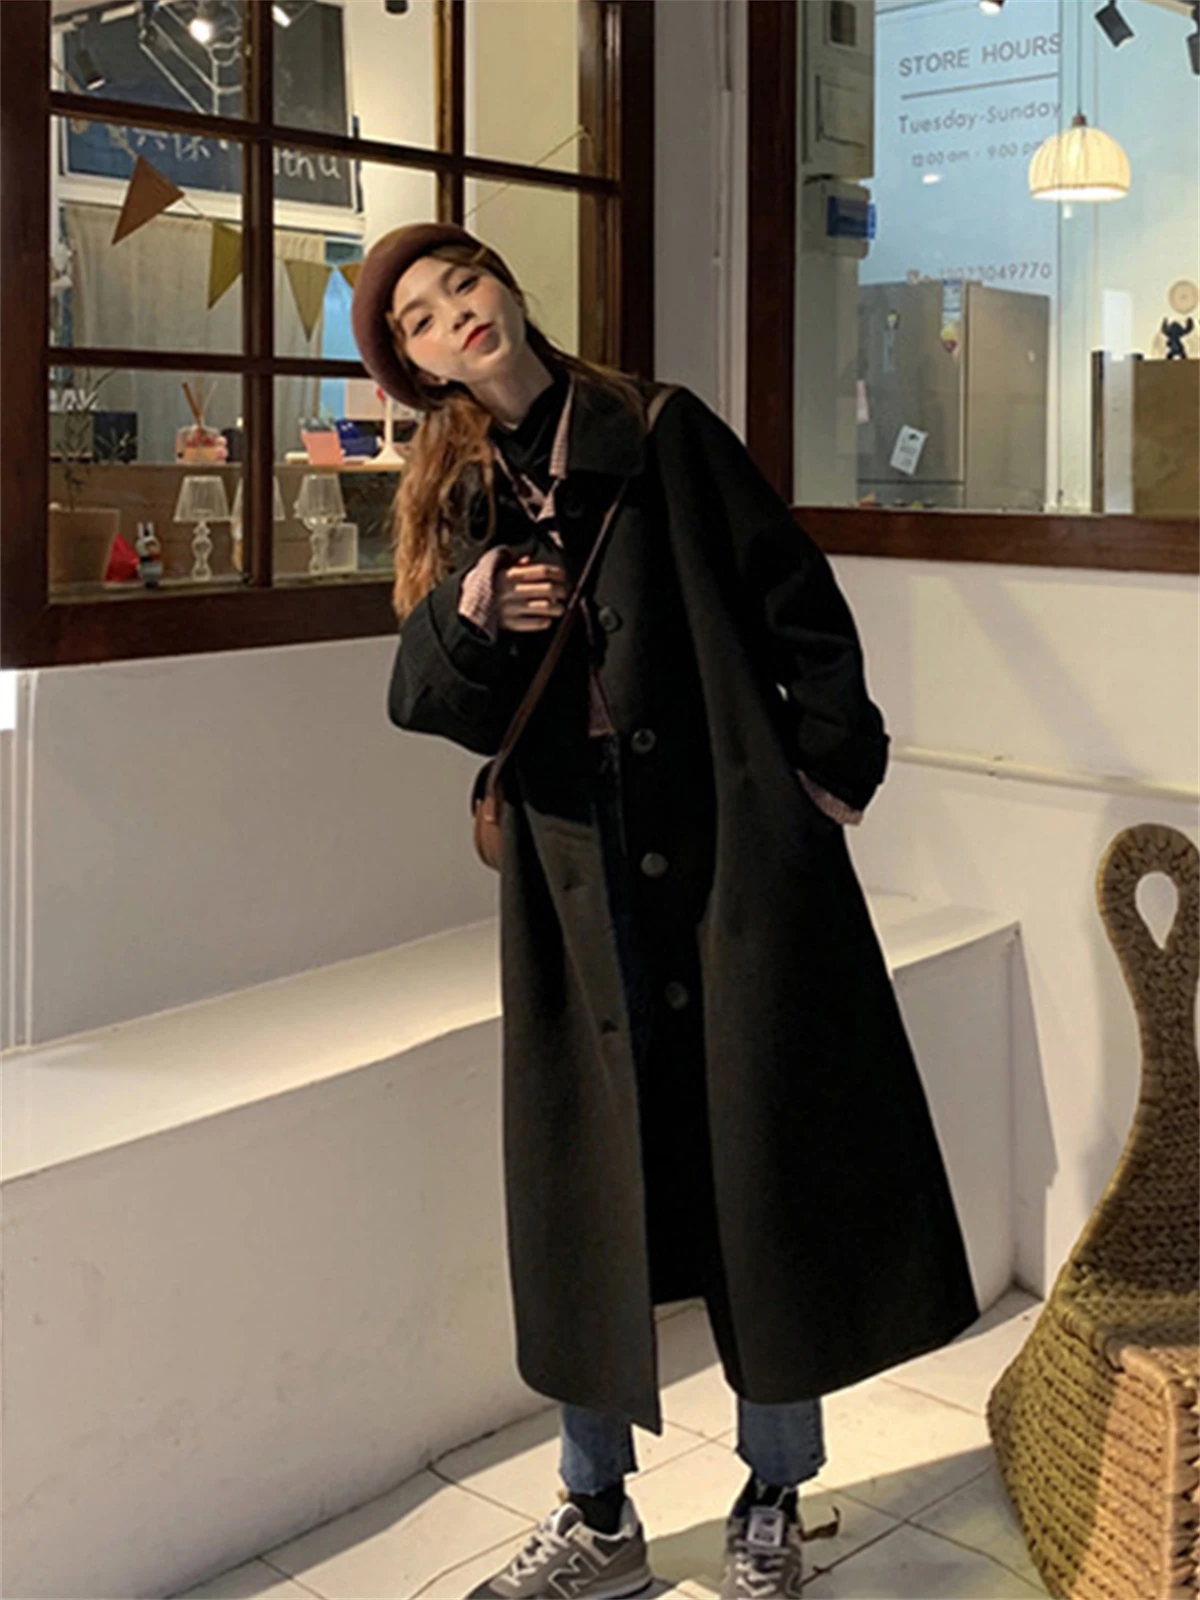 Double Sided Cashmere Woolen Coat For Small Women In Autumn And Winter 2022 New Korean Black Medium Long Woolen Coat s85 pro three sided obstacle avoidance drone aerial photos folding quadcopter rc aircraft toy with single 4k camera gesture photo single battery version black silver gradient